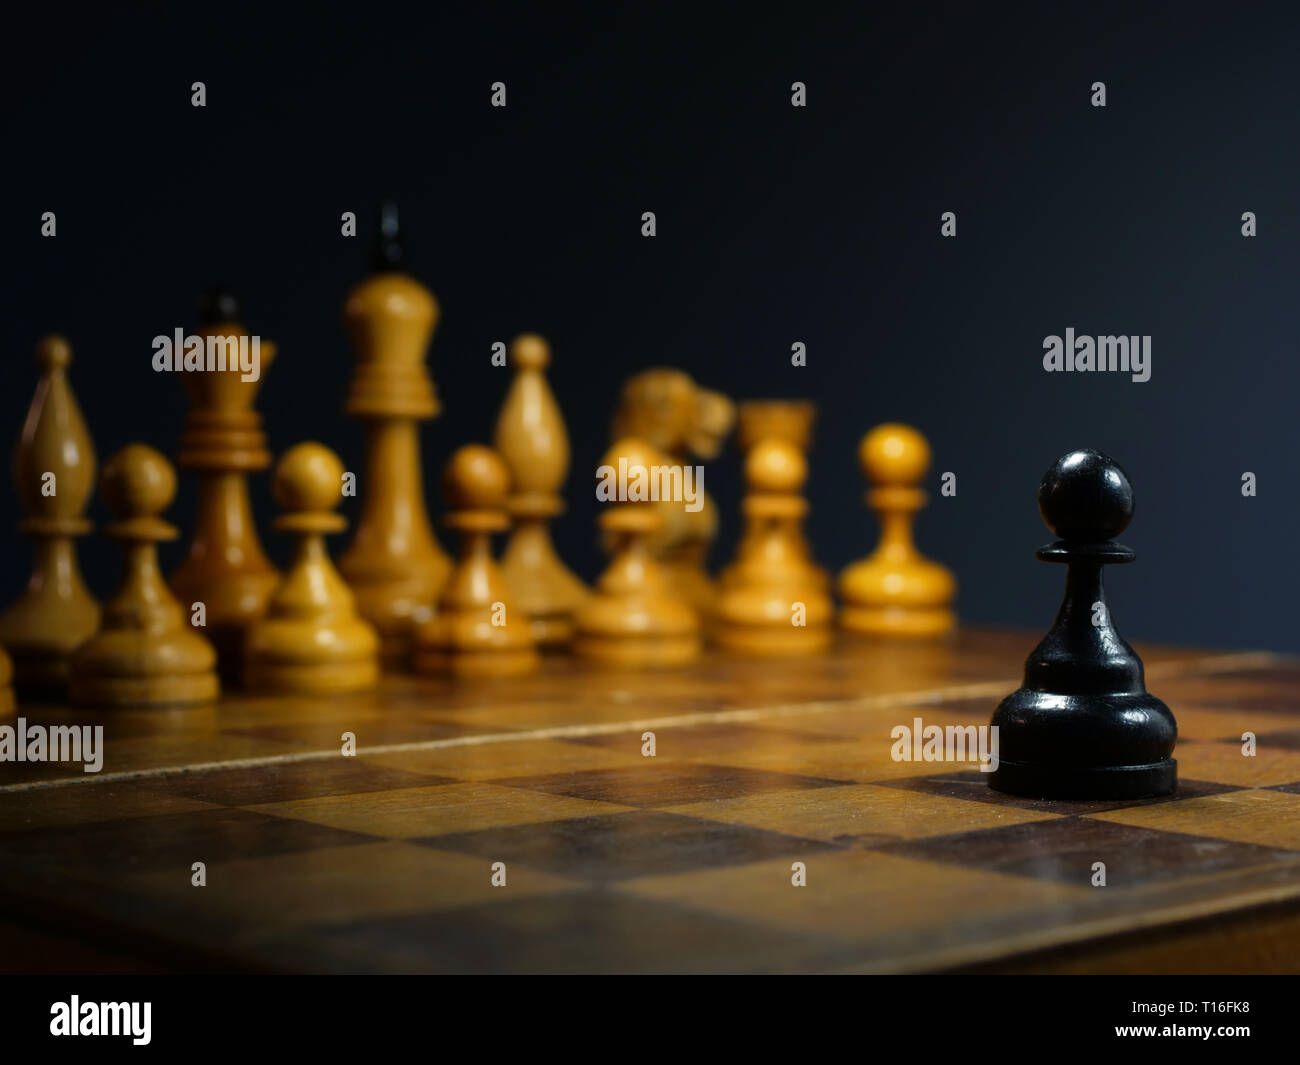 Competition in business and challenge. Black pawn on a desk. Stock Photo